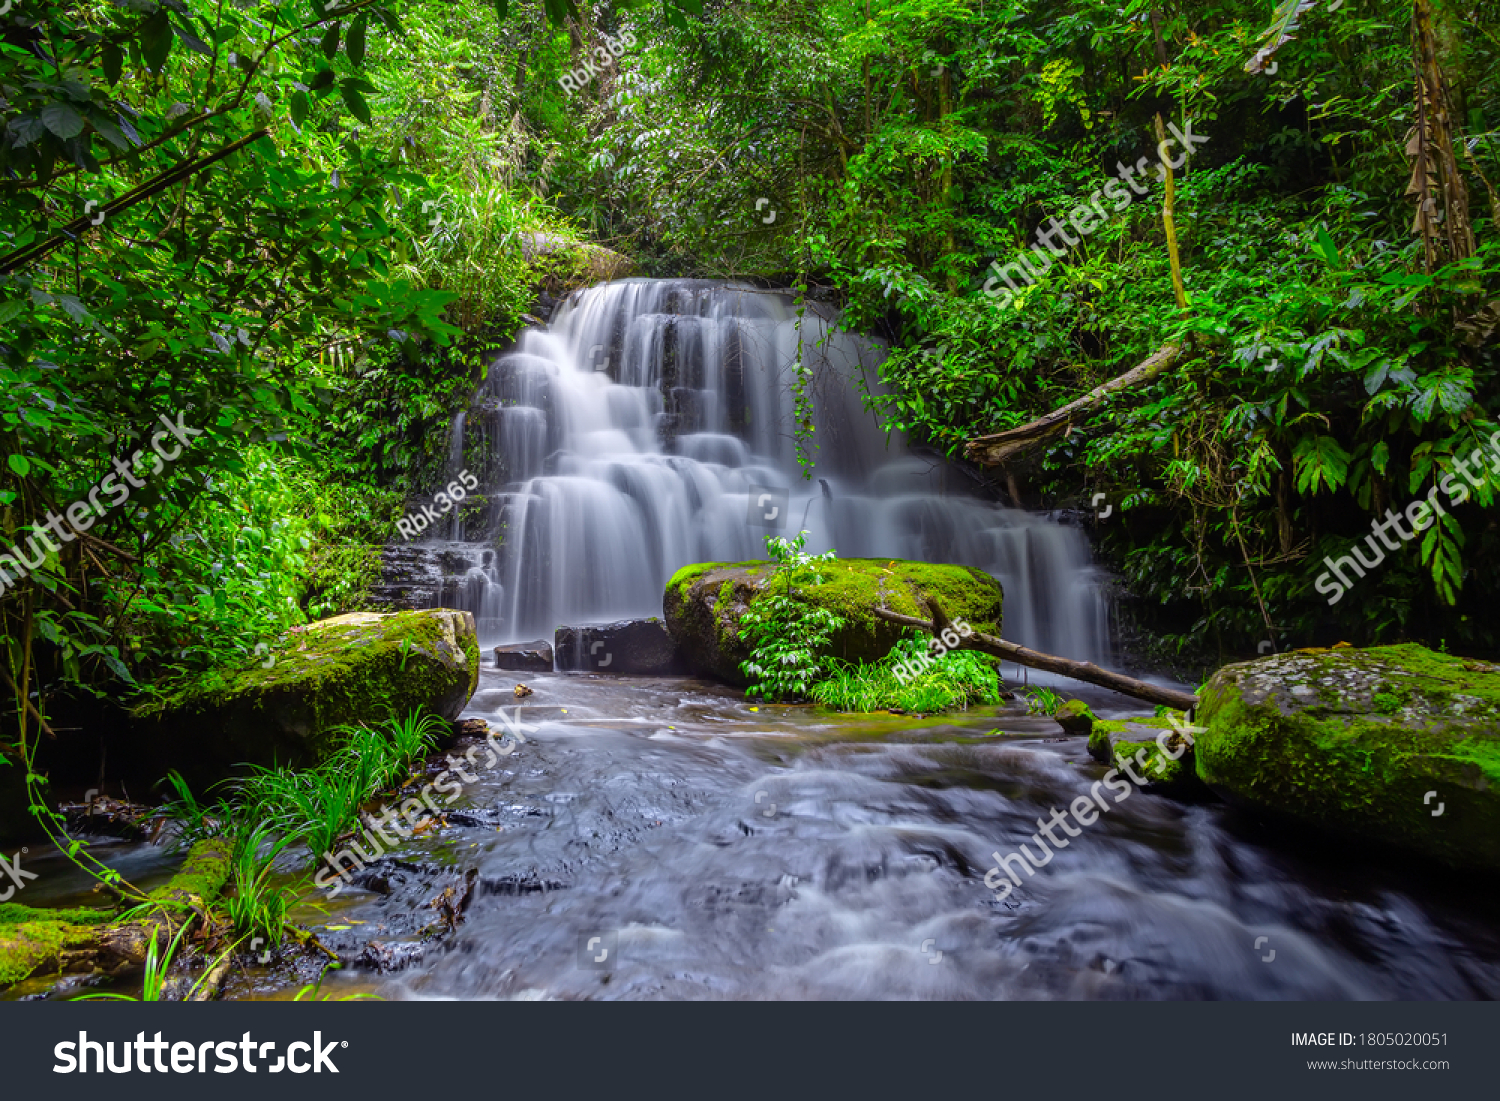 Mun dang or Man dang waterfall with a pink flower foreground in Rain Forest at Phitsanulok Province, Thailand #1805020051